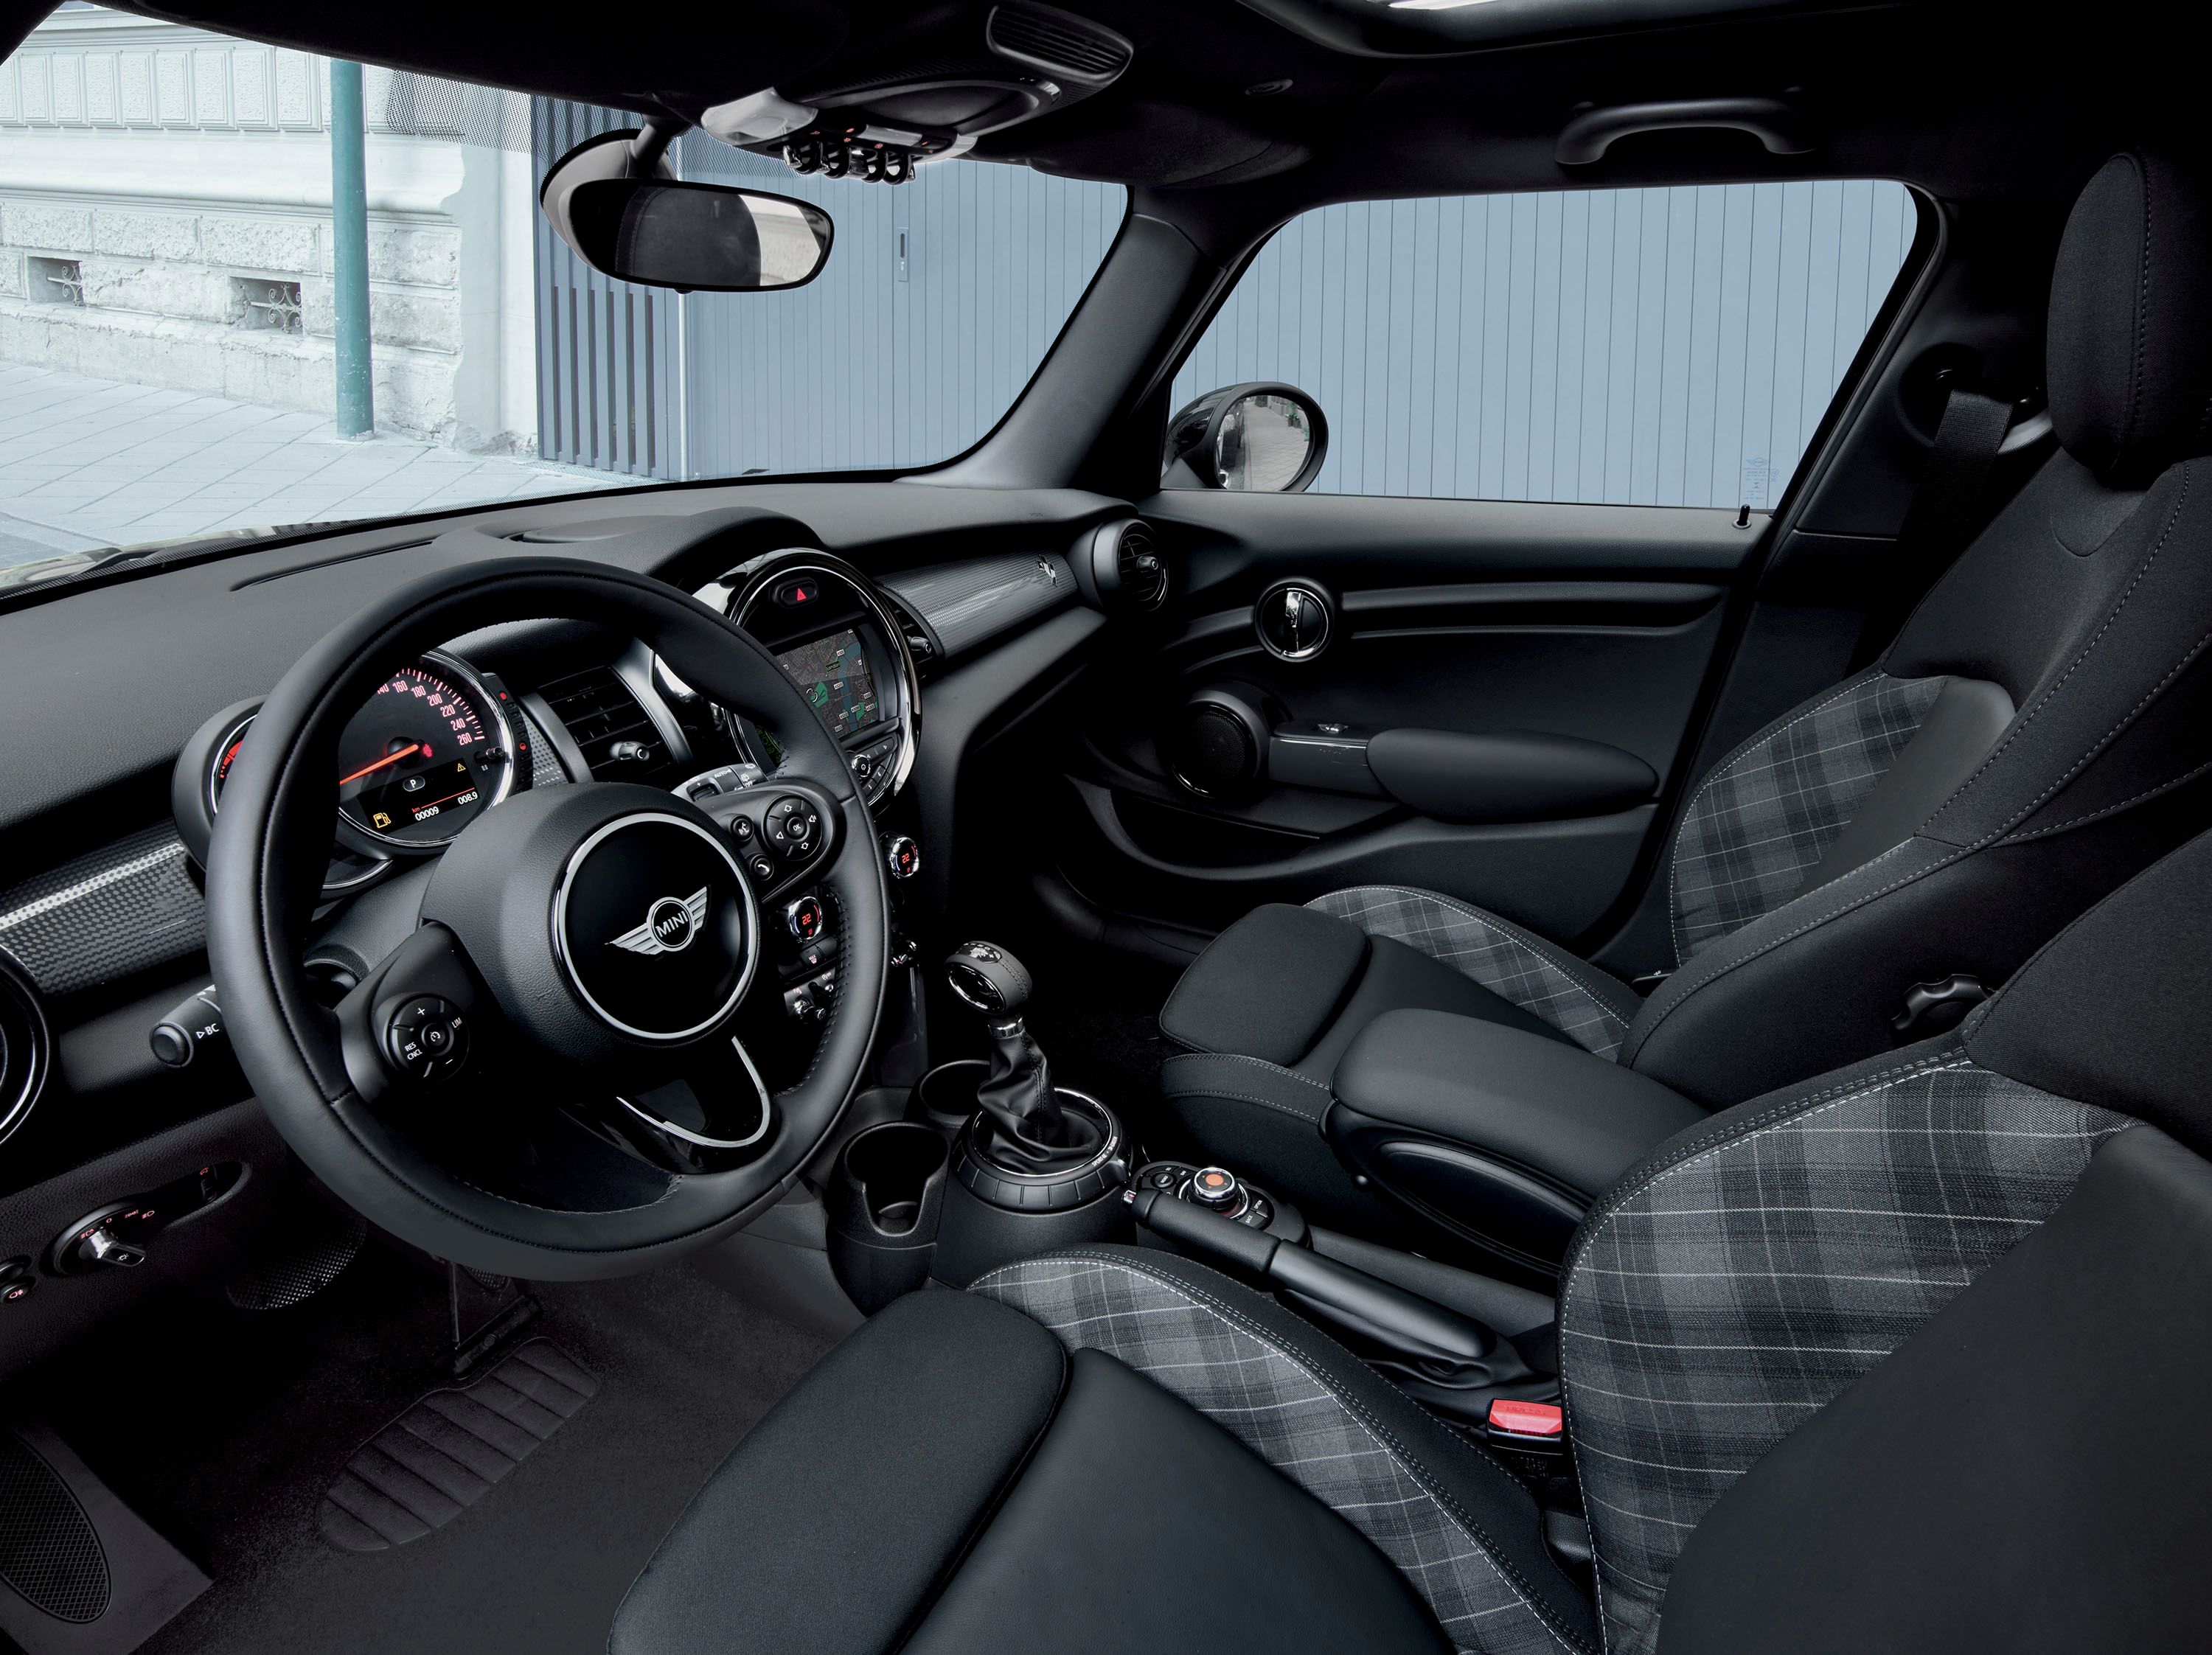  The interior is all black, with leather and fabric upholstery